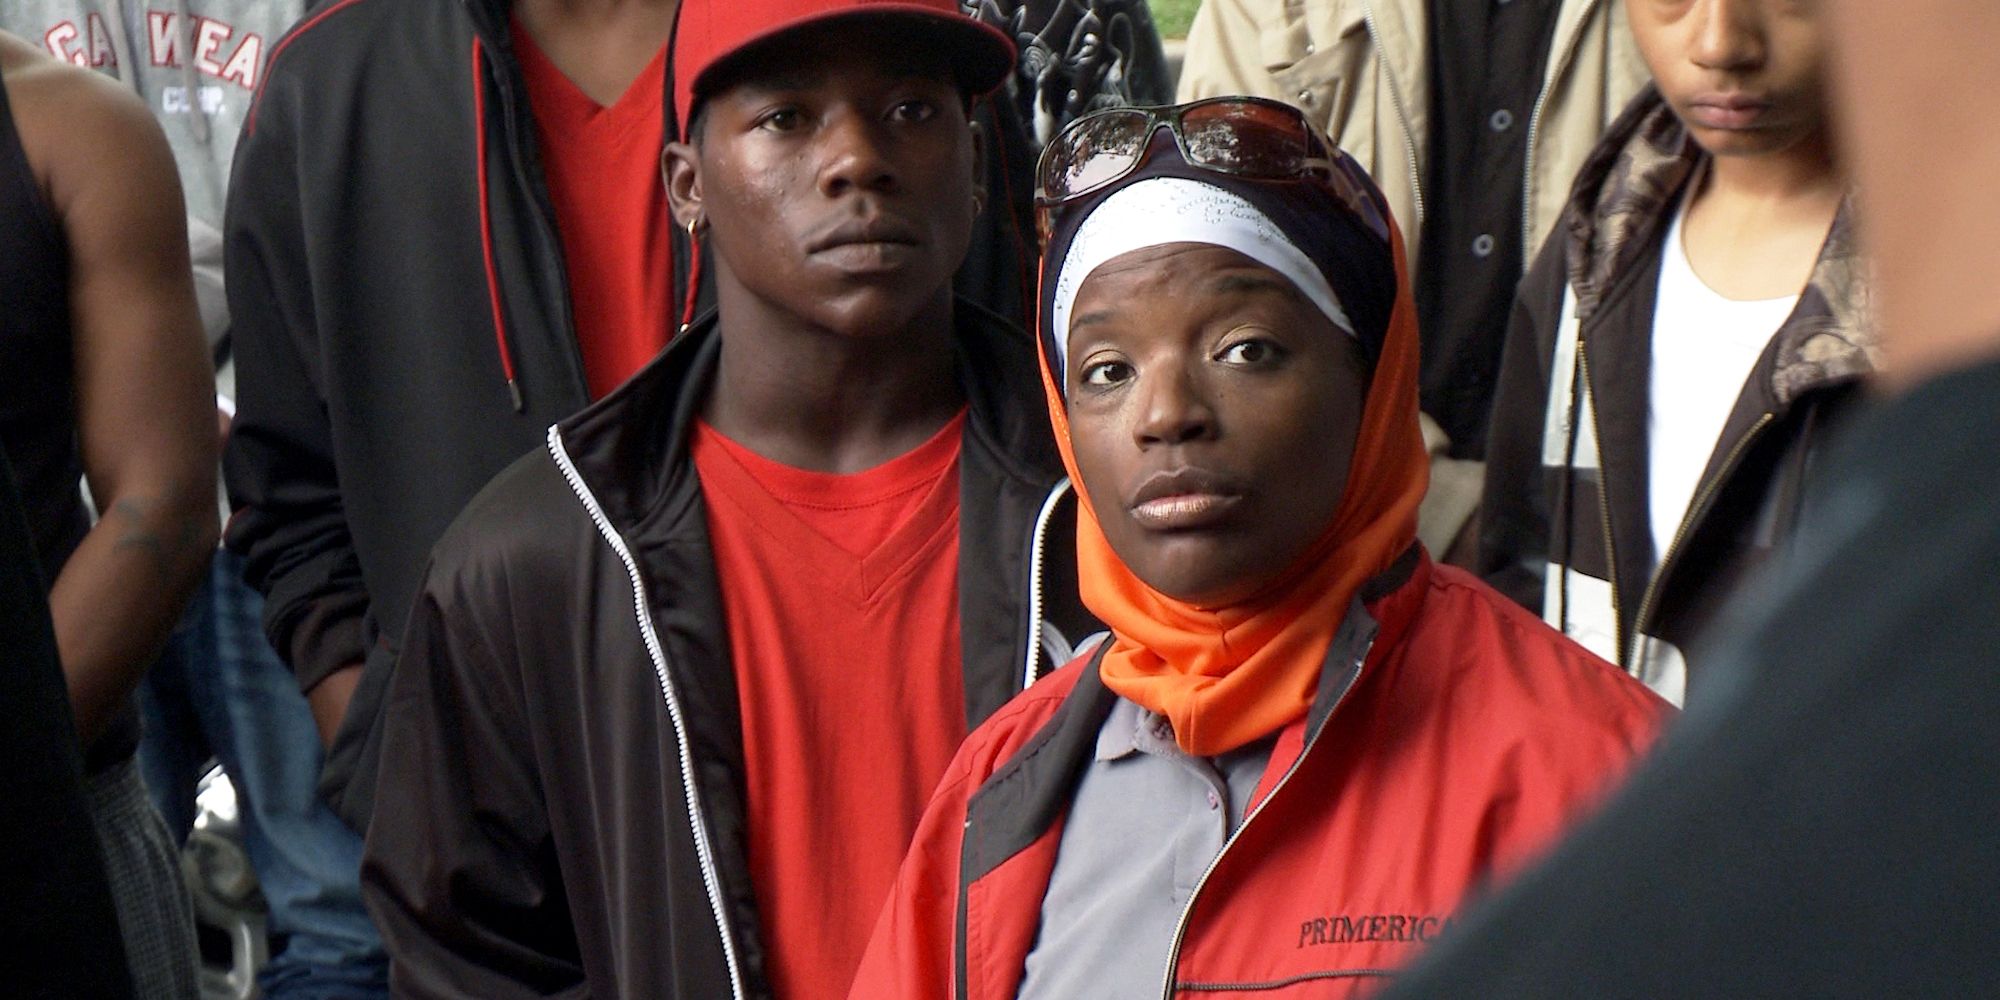 A man and a woman looking at someone in the documentary The interrupters 20110